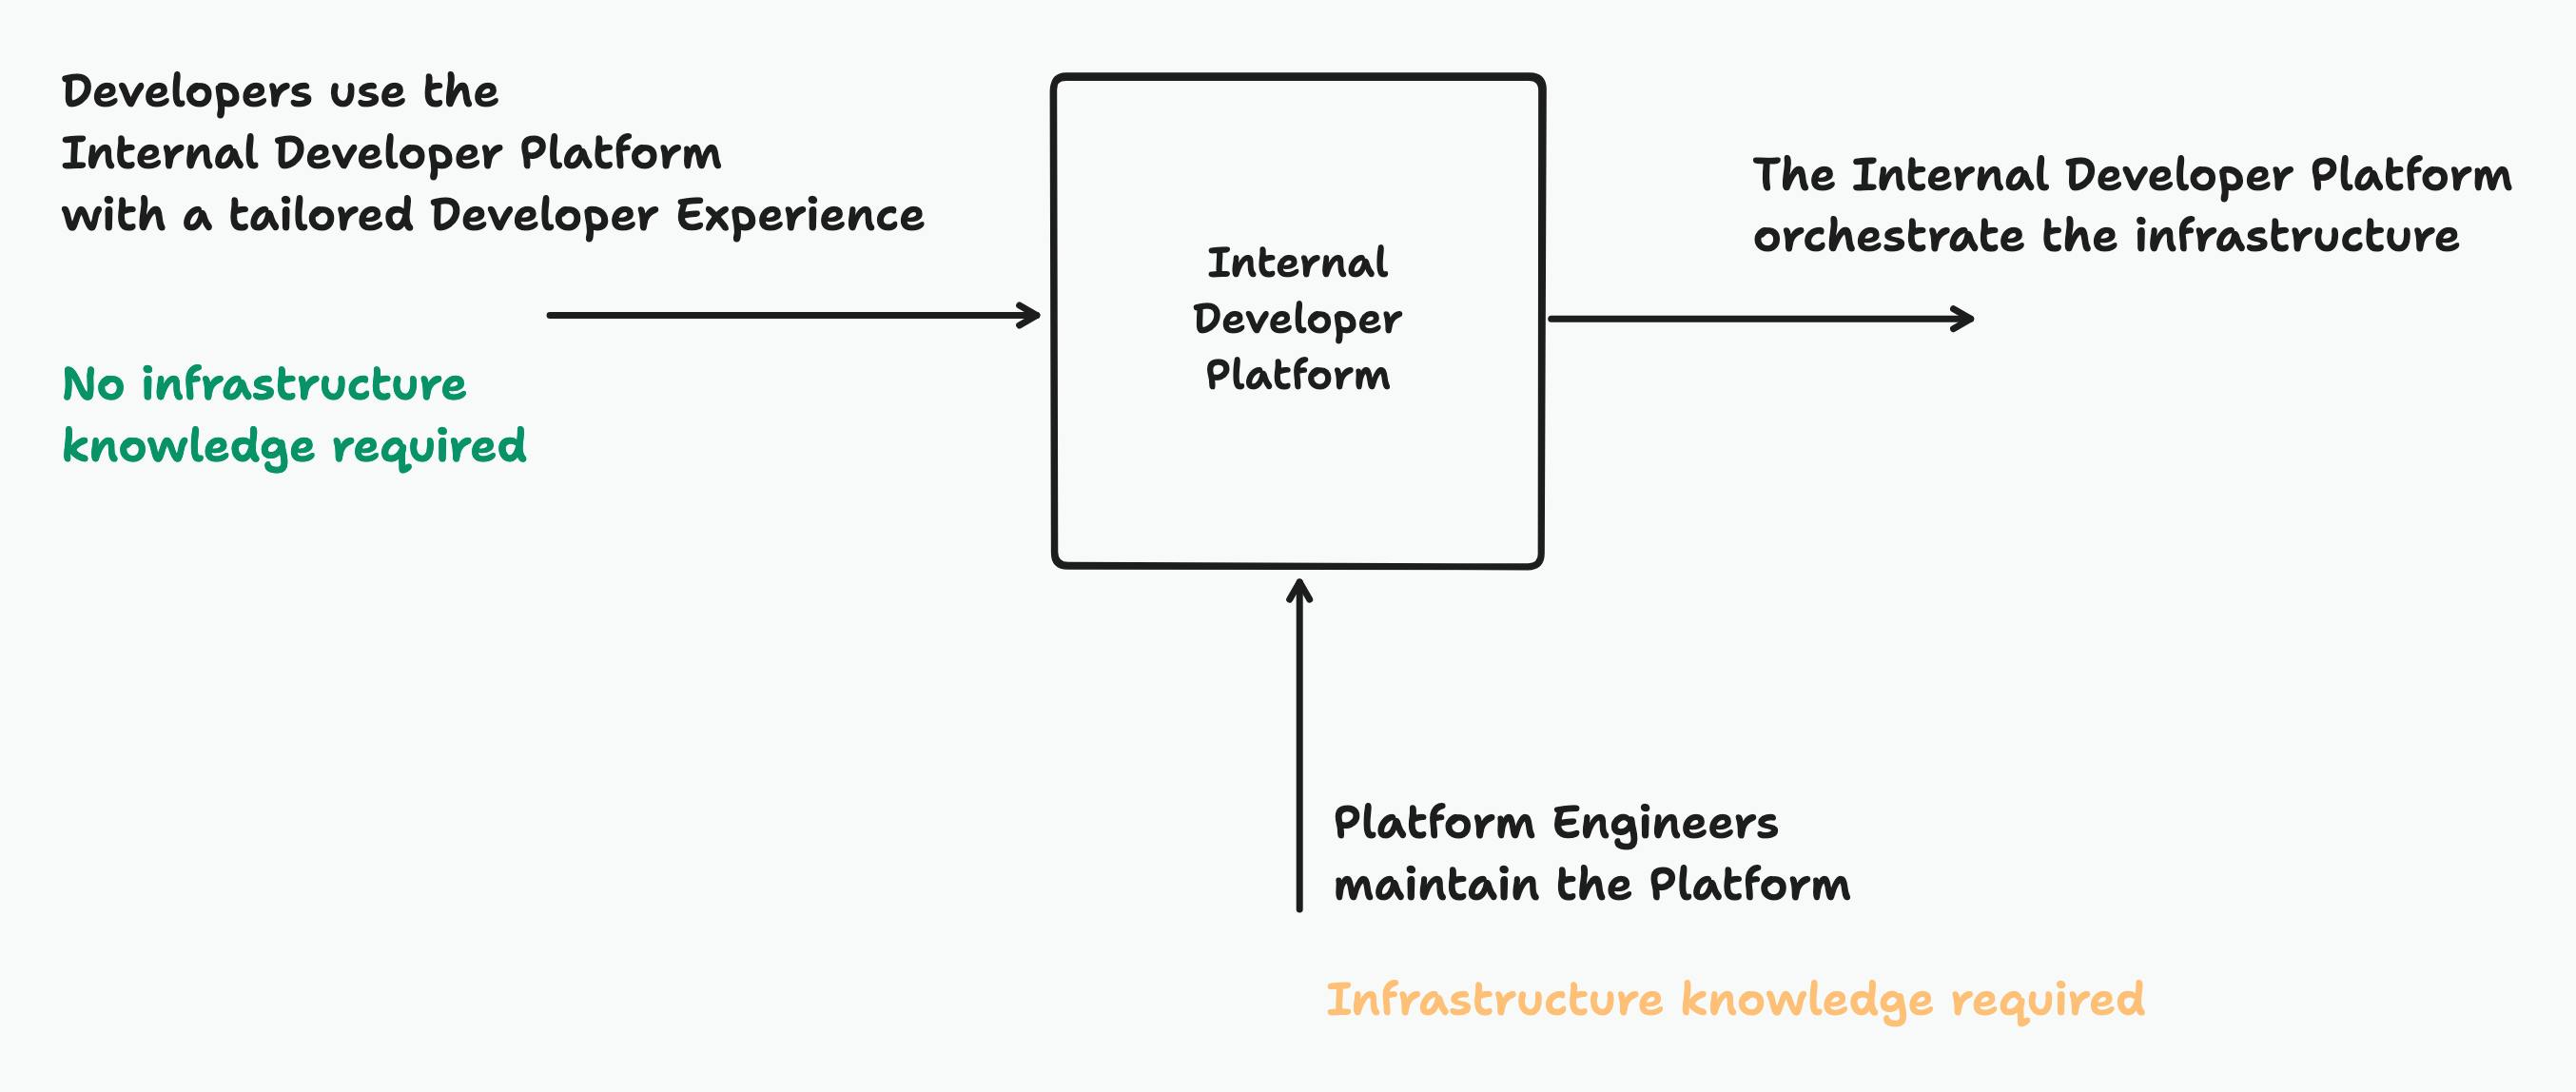 An Internal Developer Platform acts as a middleware to provide a Self-Service experience to the developers.